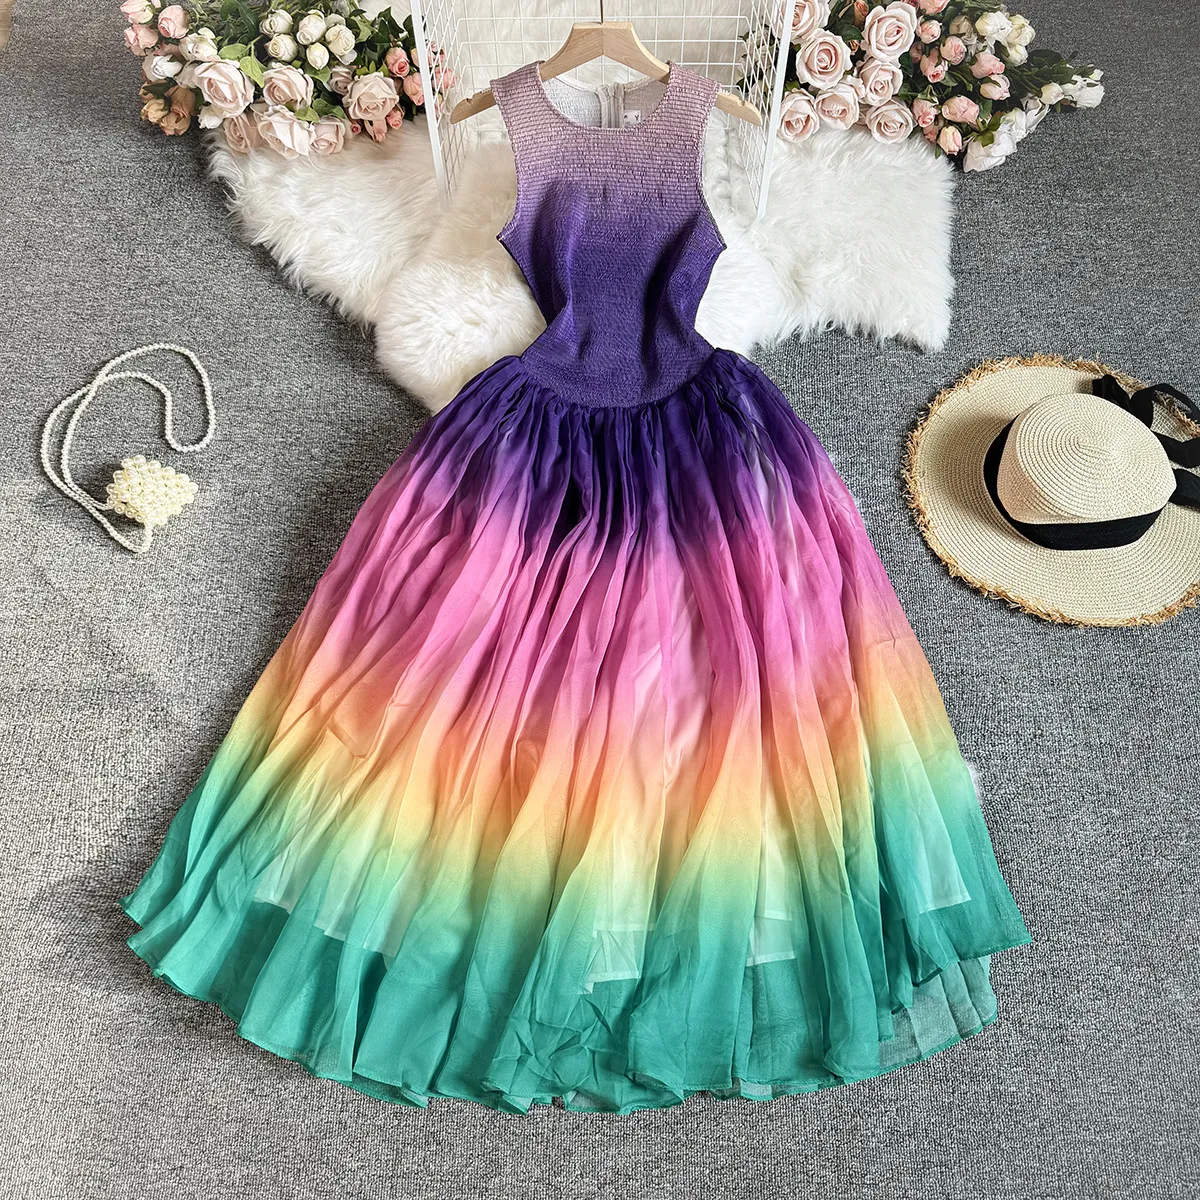 Fashionable and luxurious temperament. Sleeveless round neck with waistband and slimming effect. A-line rainbow gradient chiffon dress. Elegant long skirt